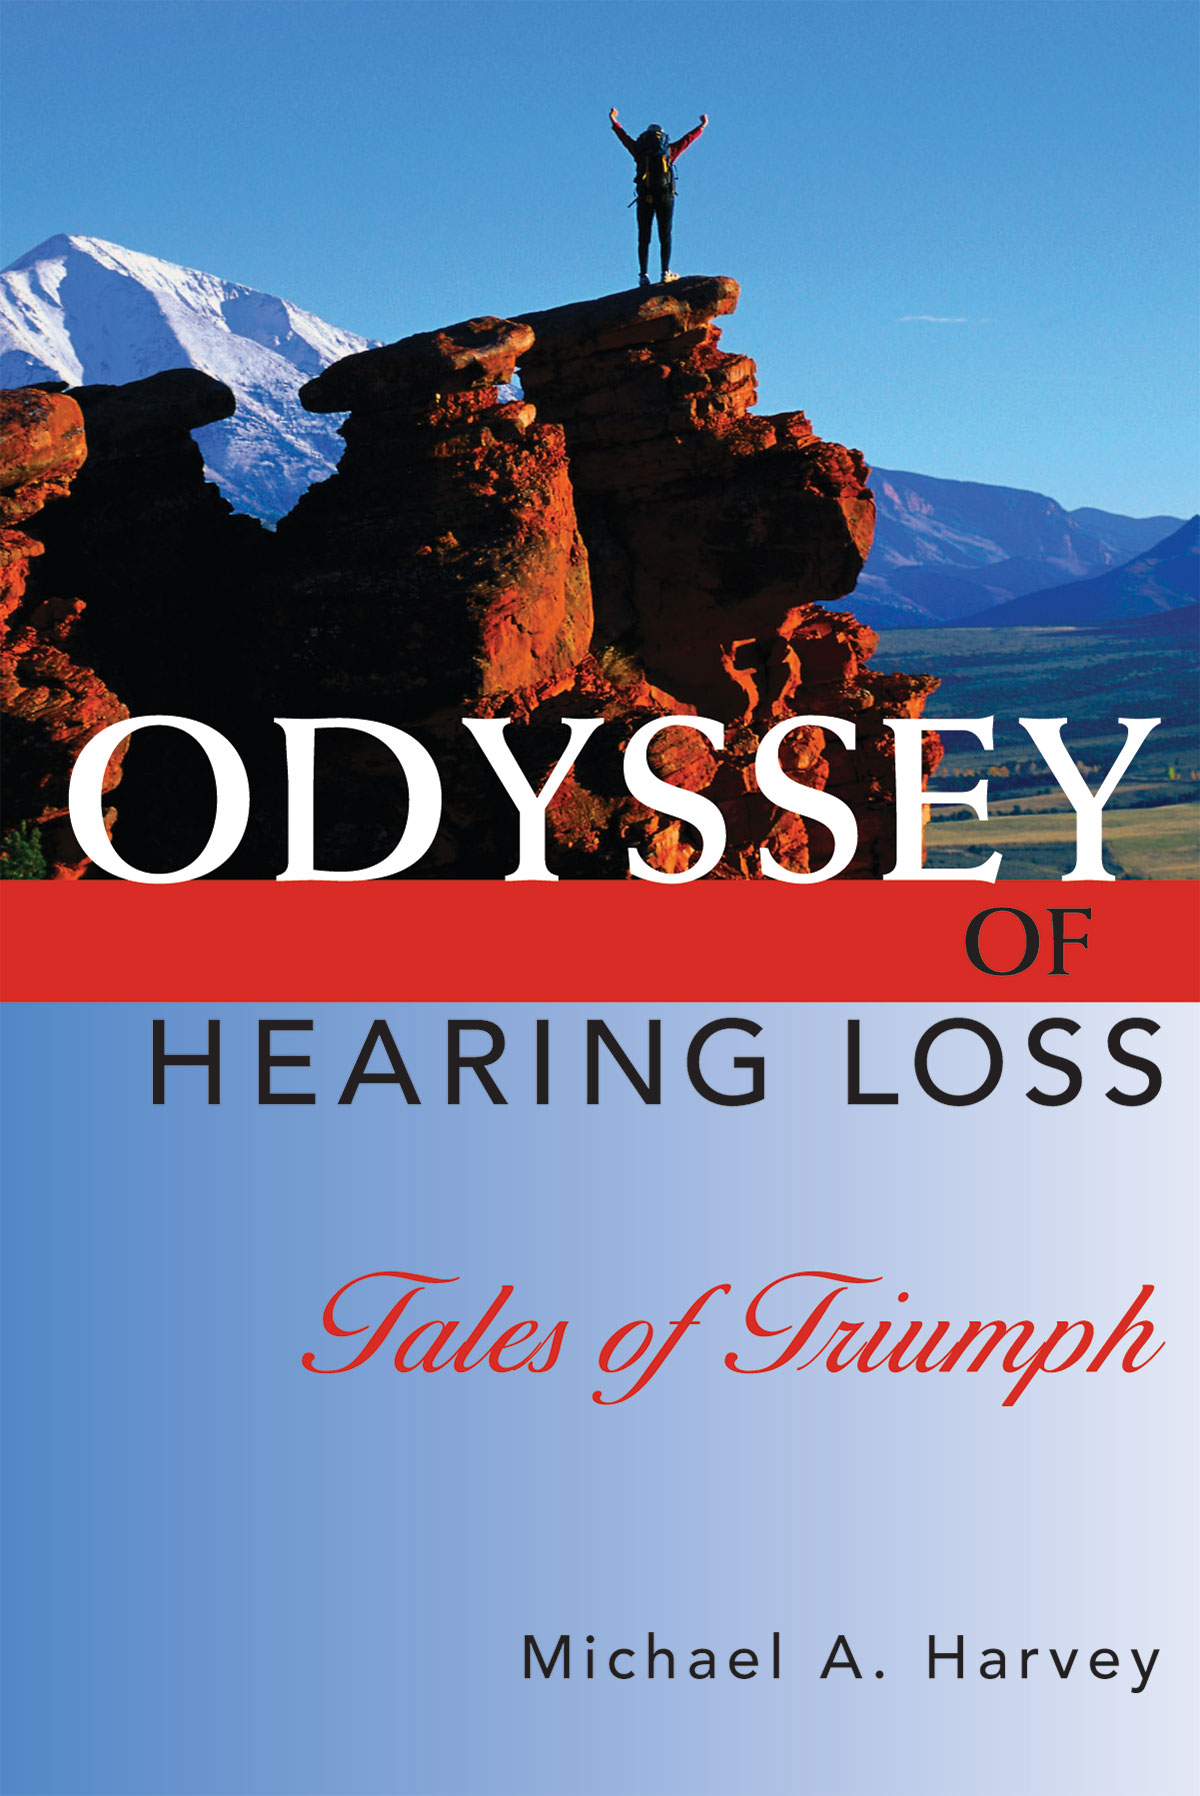 Odyssey of Hearing Loss: Tales of Triumph